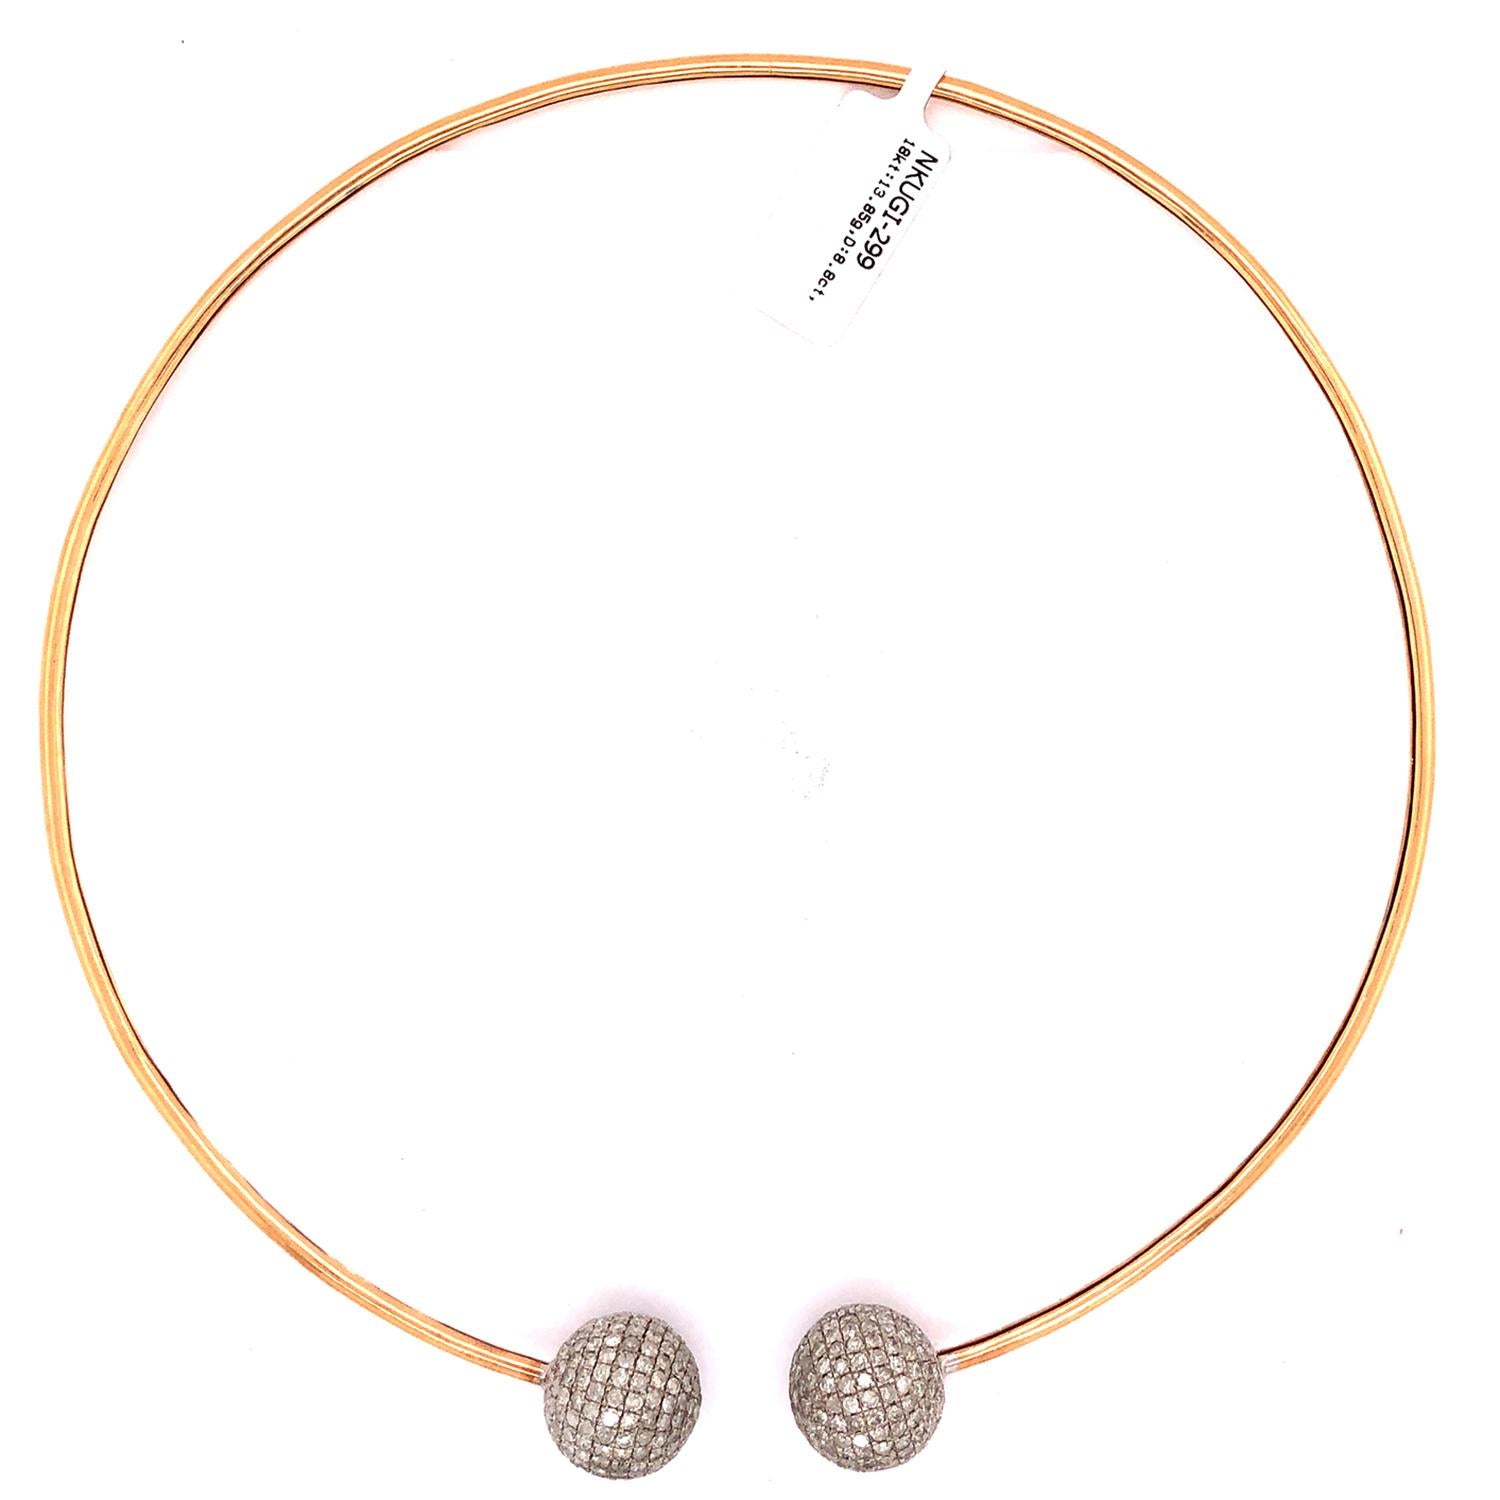 Chic and lovely looking Grey Diamond Ball Choker Necklace in 18k Yellow Gold is trending and can be layered with long charm necklaces. Diamond Balls are 16mm in size.


18kt gold: 13.85gms
Diamond:8.8cts
Bead 16mm
